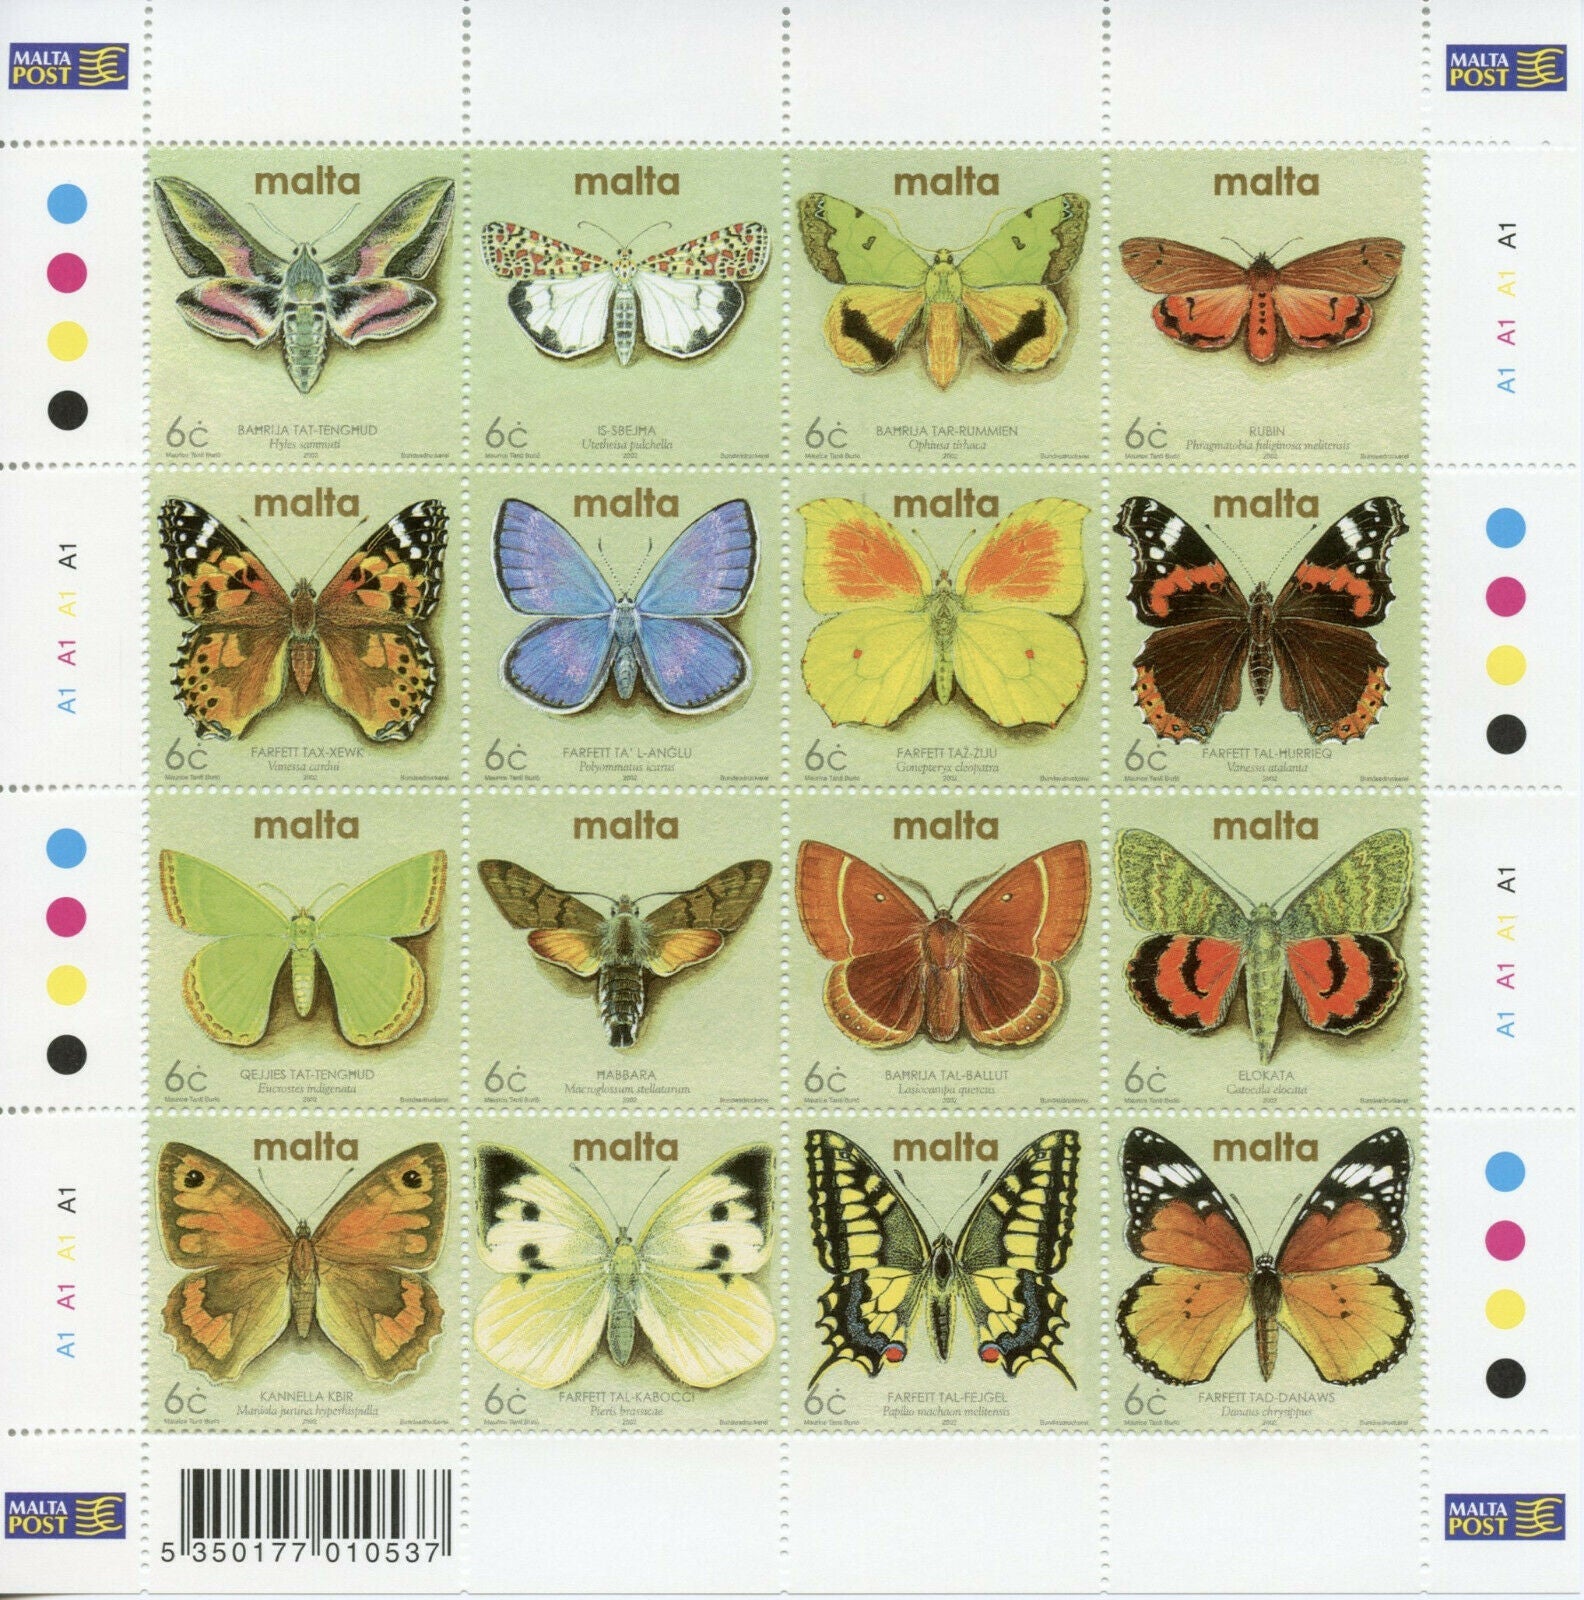 Malta 2002 MNH Moths & Butterflies Stamps Red Admiral Butterfly Insects 16v M/S